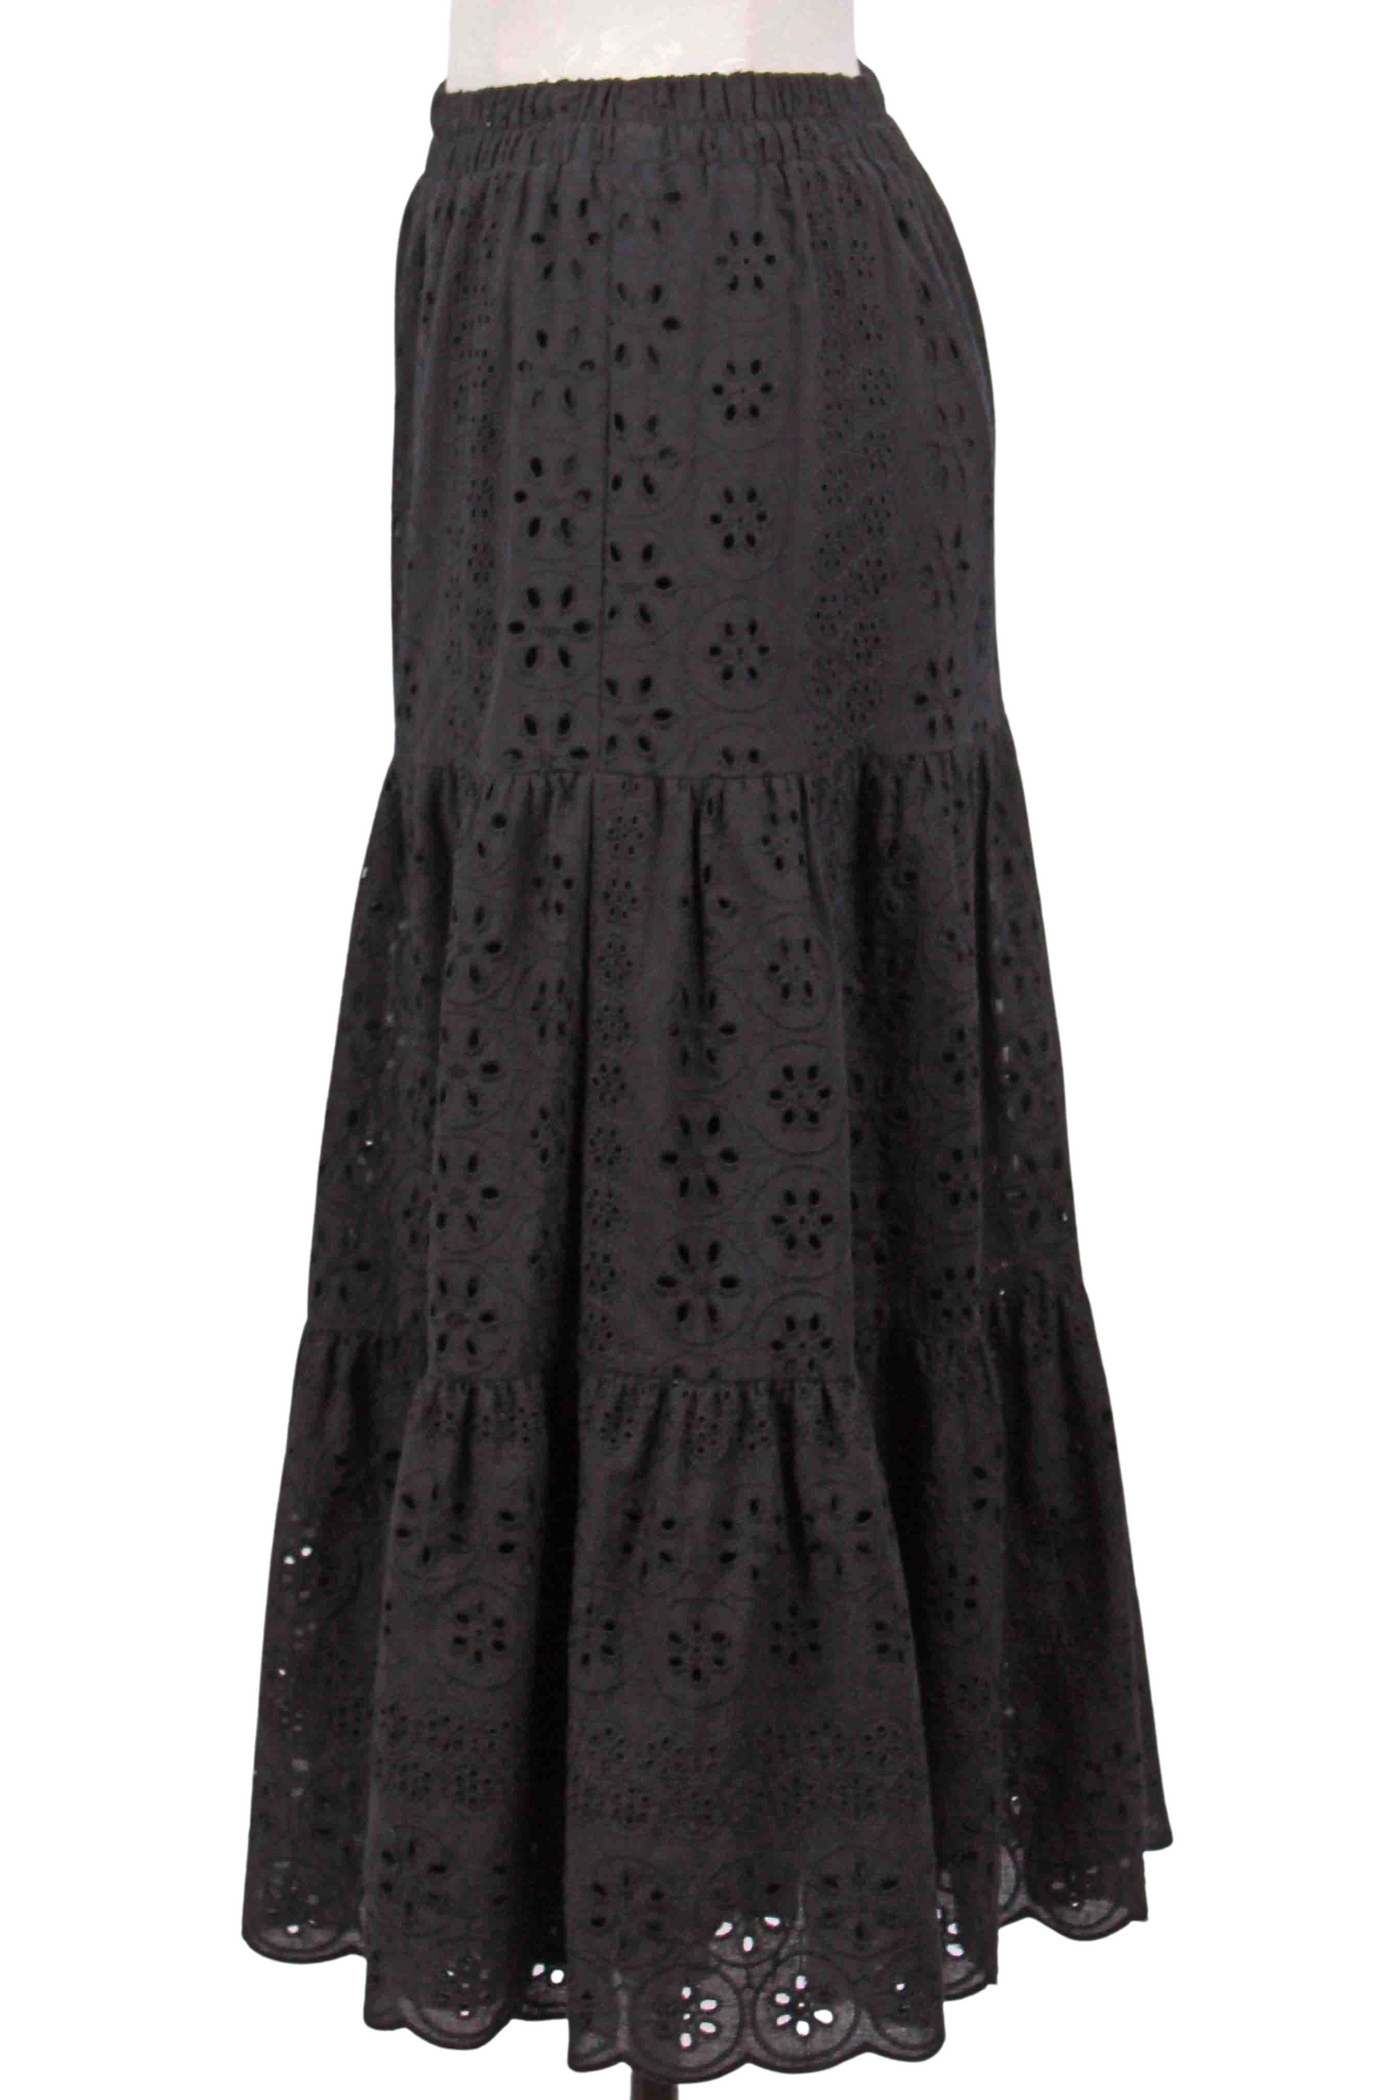 side view of black Tiered Eyelet Midi Length Skirt by Apricot with an elastic waist